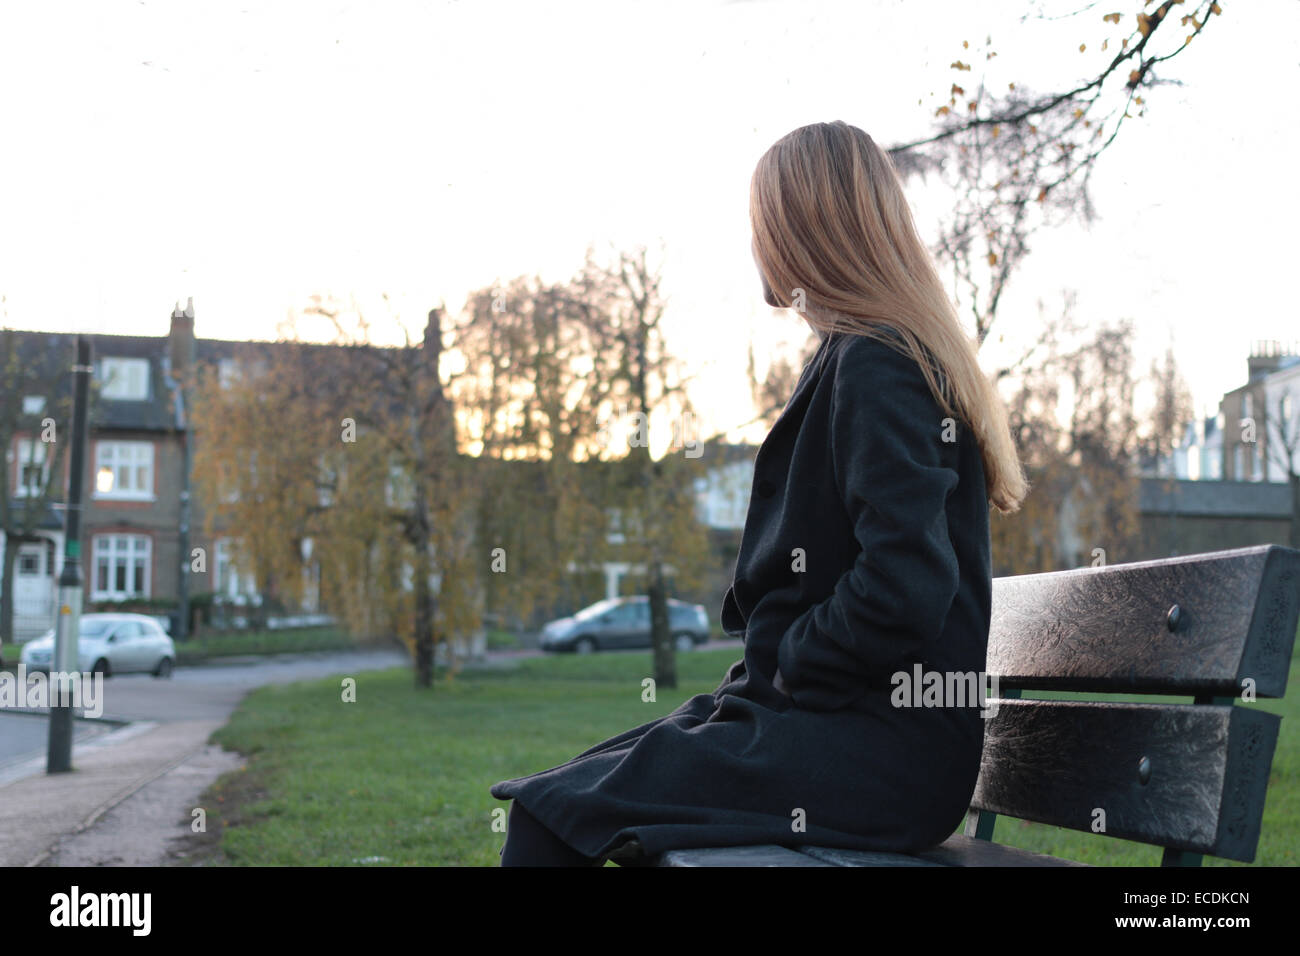 Rear view shot of a young woman sitting on a seat looking away from camera. Stock Photo